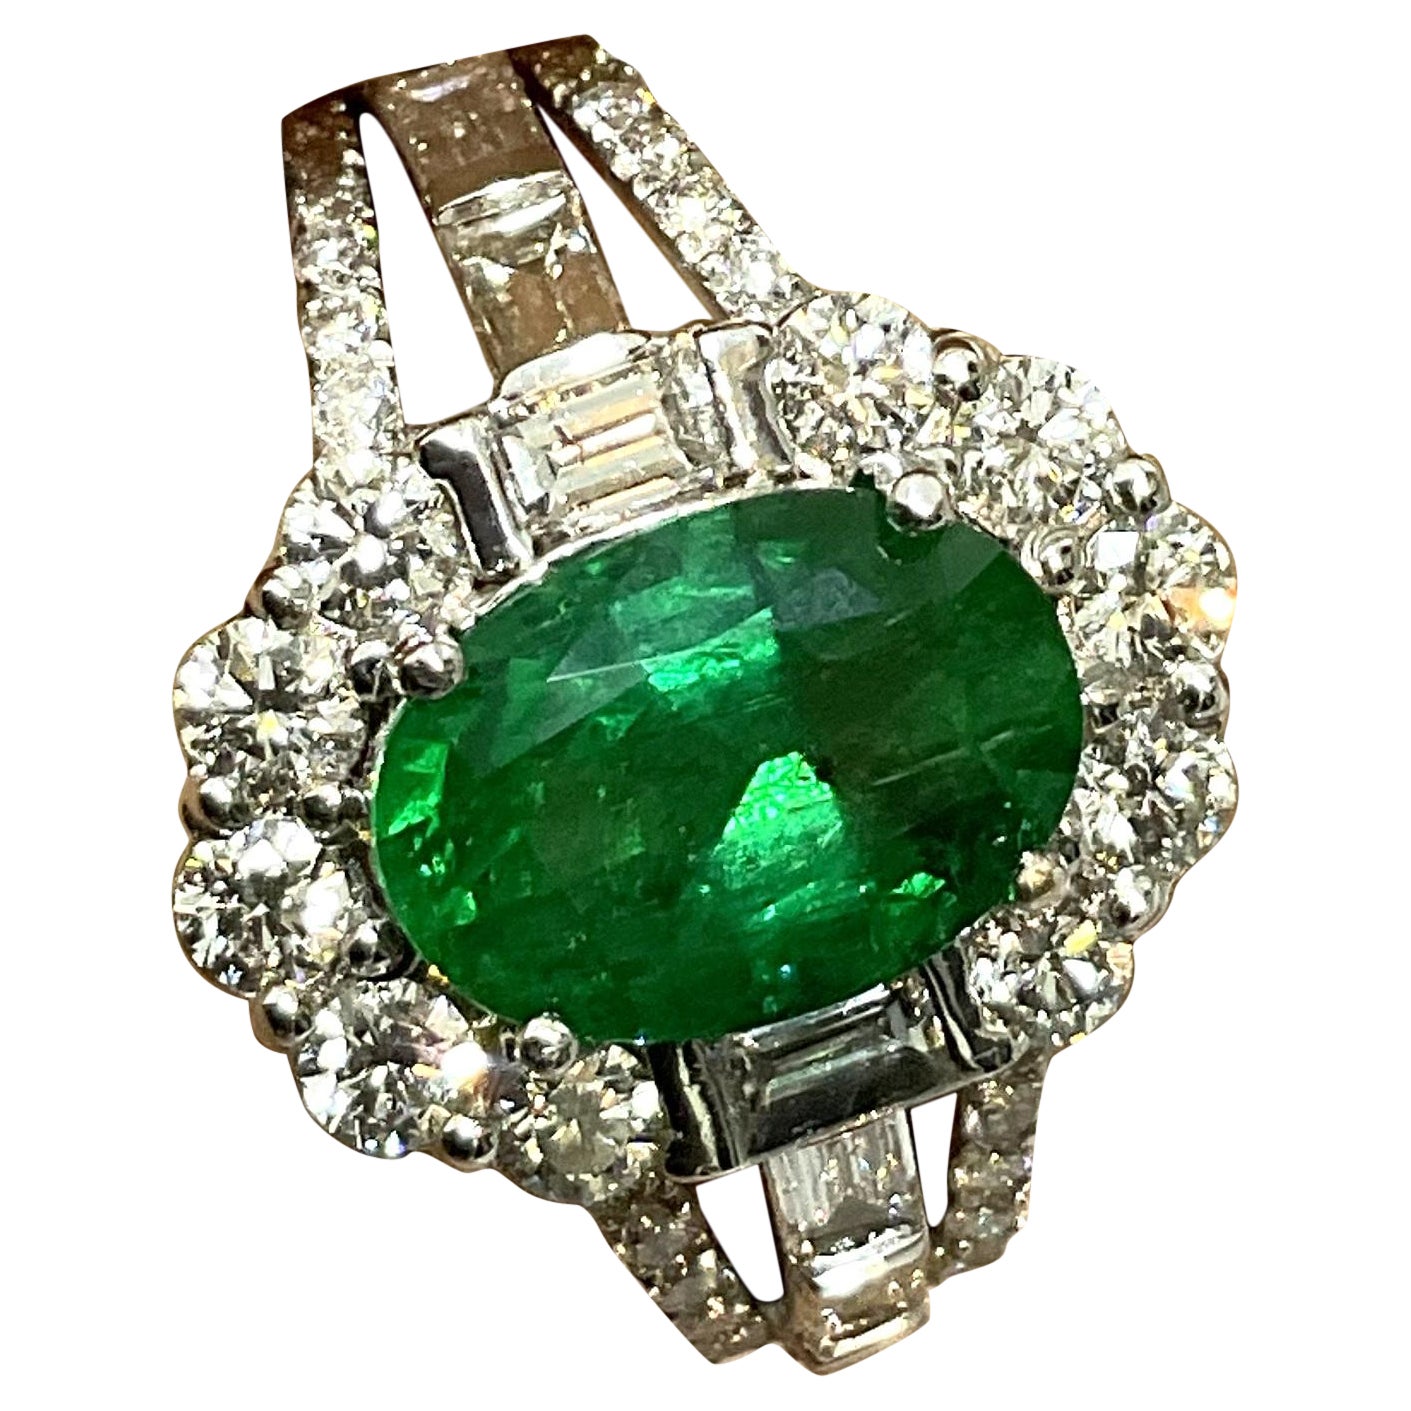 18k Gold Art Deco Zambian Emerald Cocktail Ring 2.05 cts with 1.49 ct Diamonds  For Sale 3